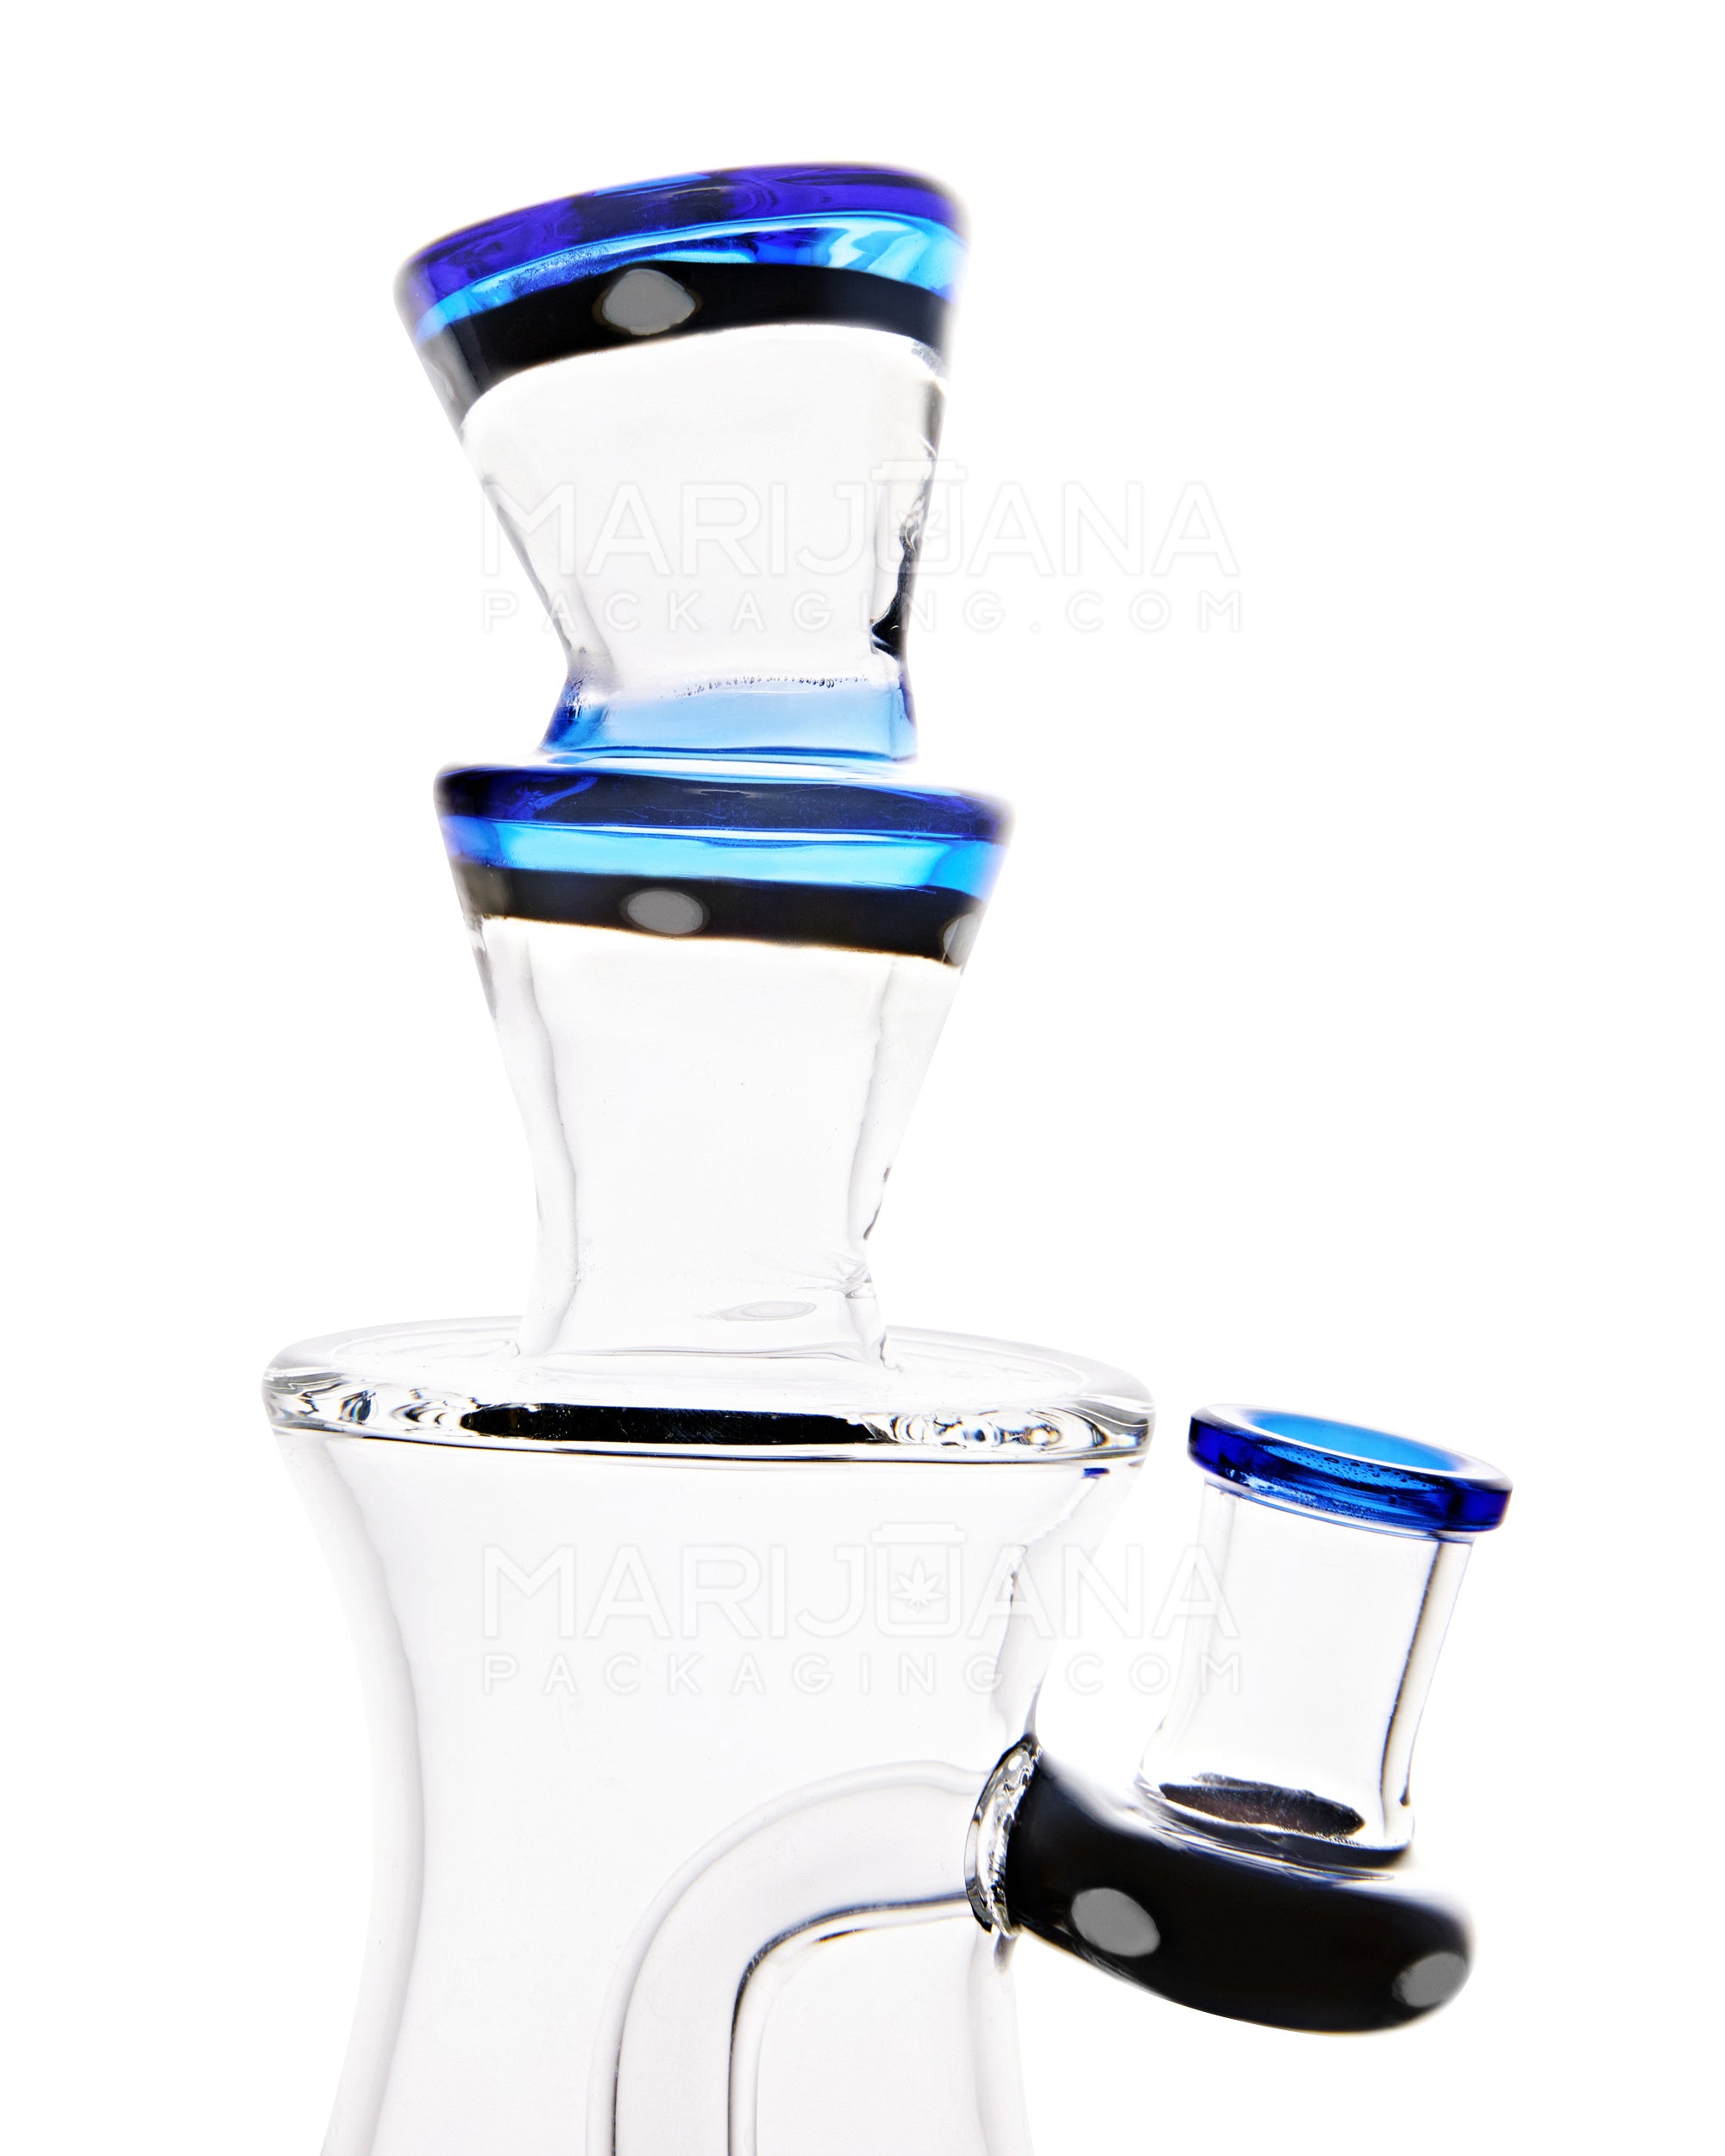 USA Glass | Angled Neck Showerhead Perc Kickback Hourglass Water Pipe w/ Indented Bowl | 7.5in Tall - 14mm Bowl - Blue